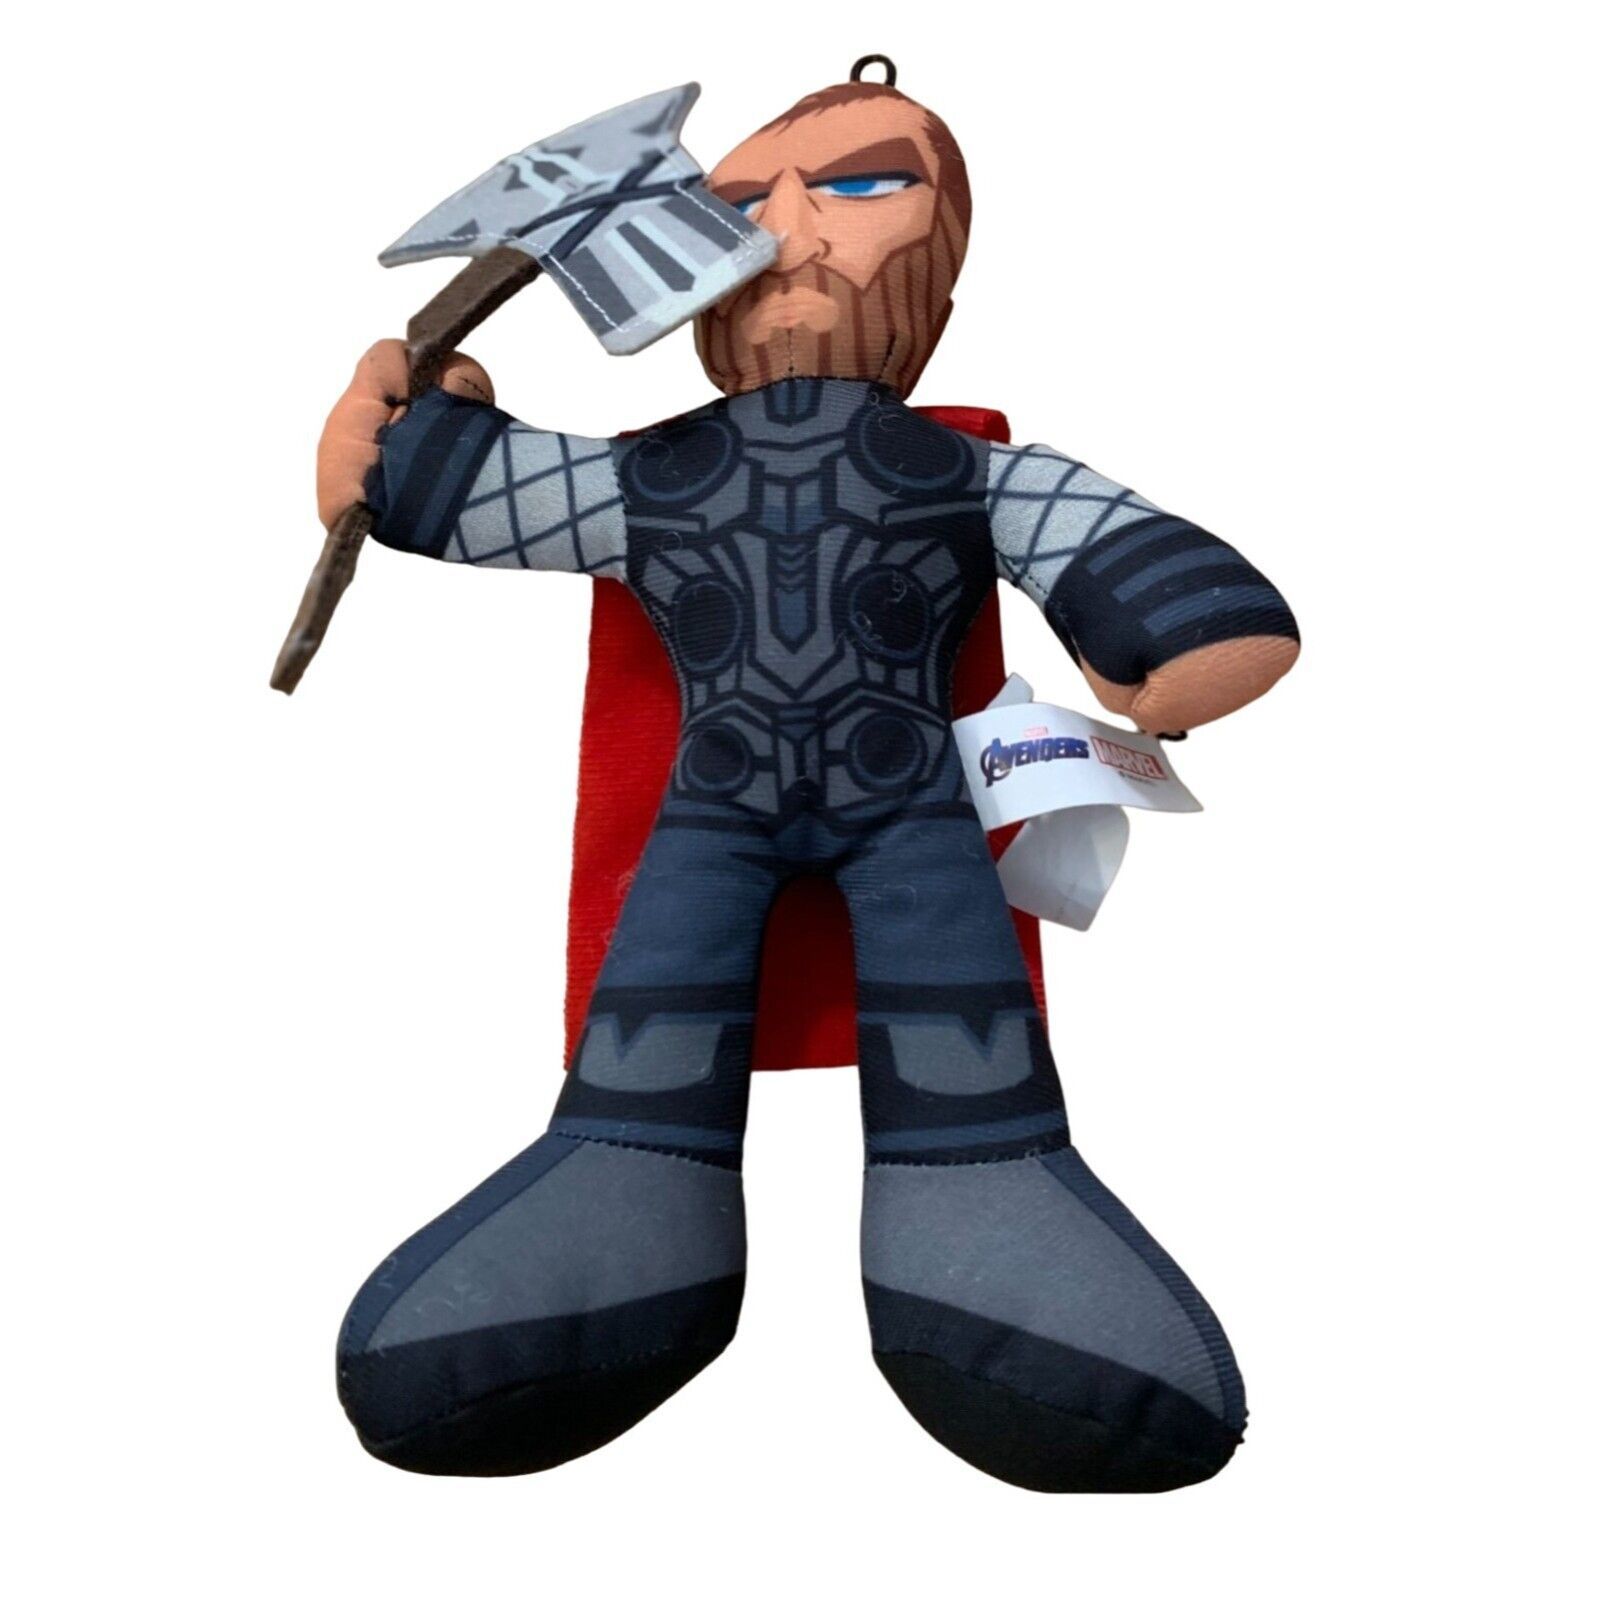 Primary image for Avengers Thor Marvel Plush Stuffed Animal Doll Toy 10 in Tall Hammer